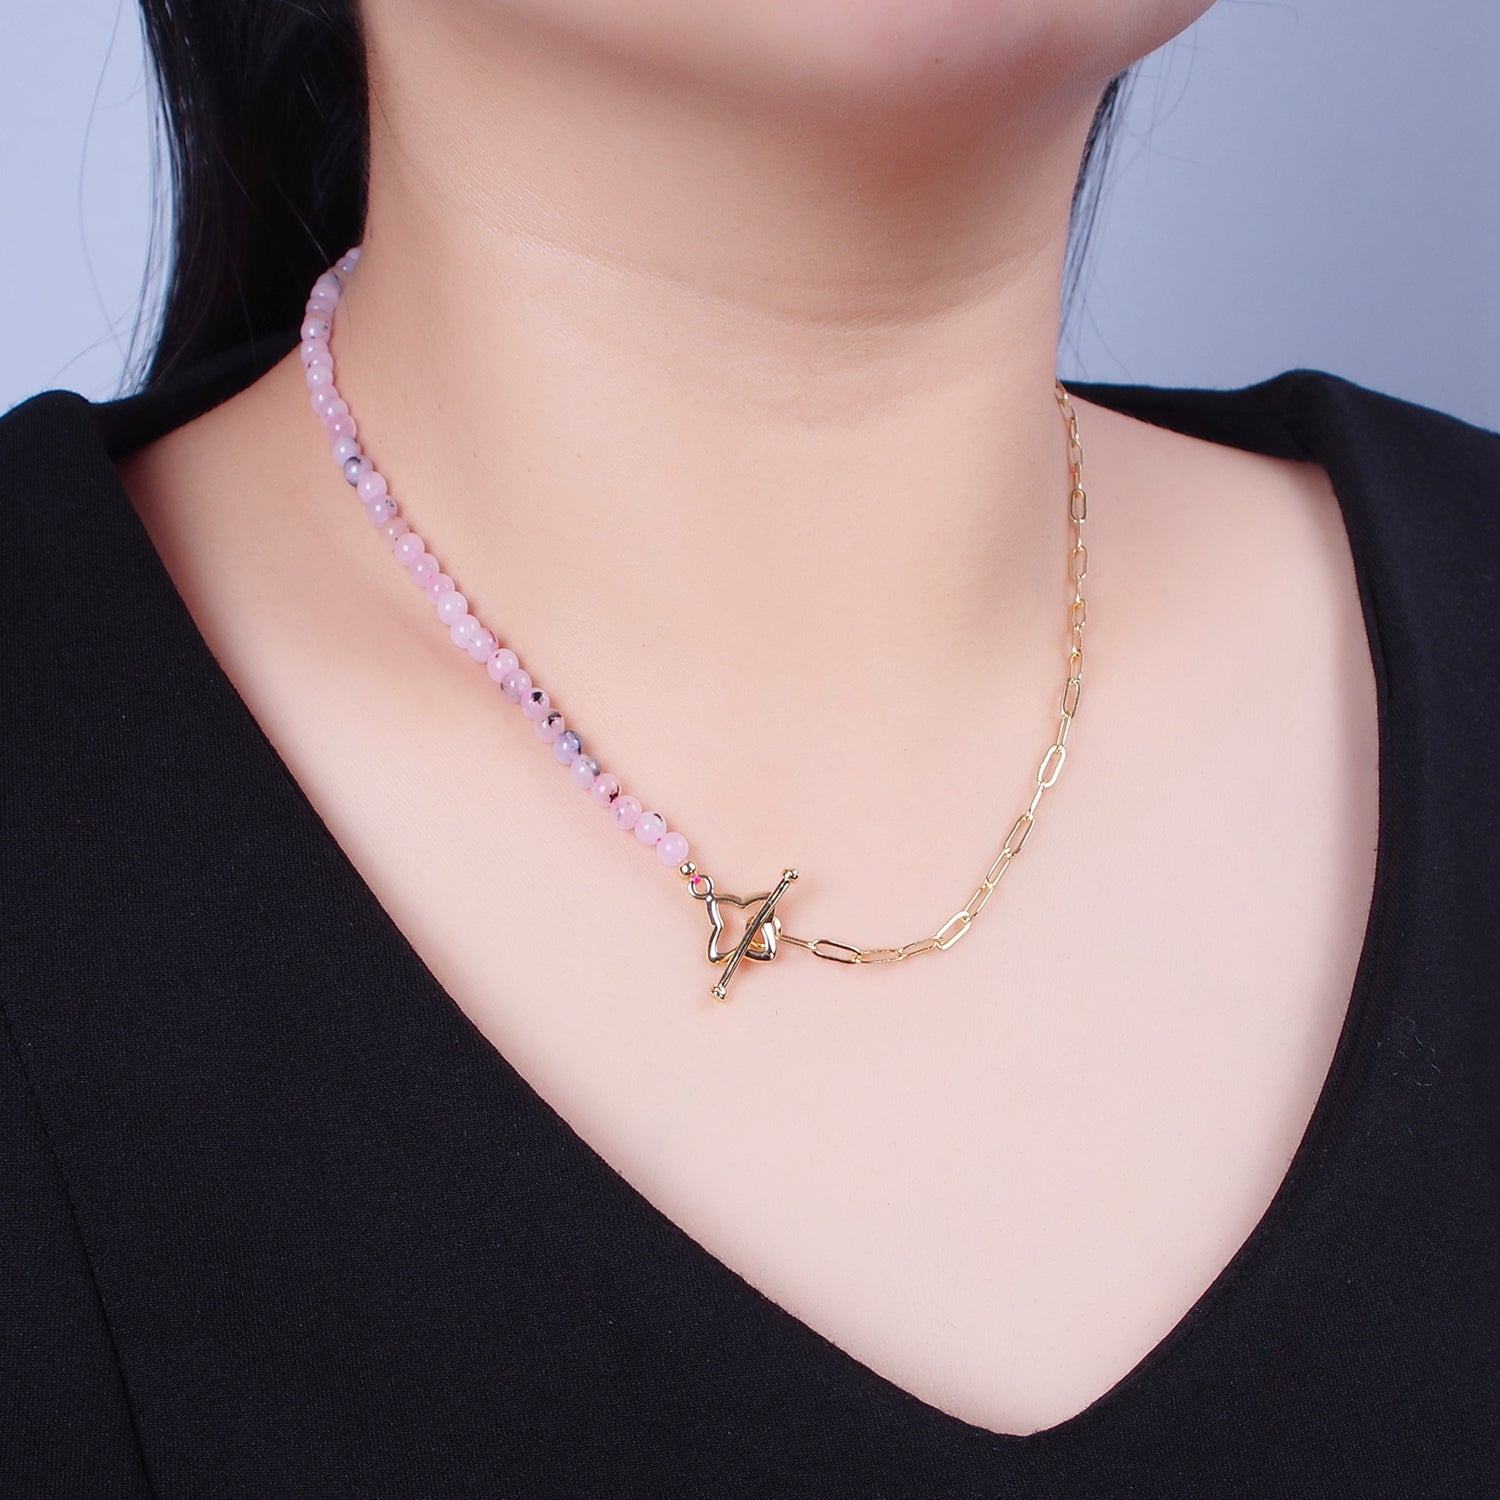 Dainty Half Bead Half Link Chain Necklace, 24k Gold Filled Paperclip Chain with Pink Jade Necklace Toggle Clasp WA-972 - DLUXCA